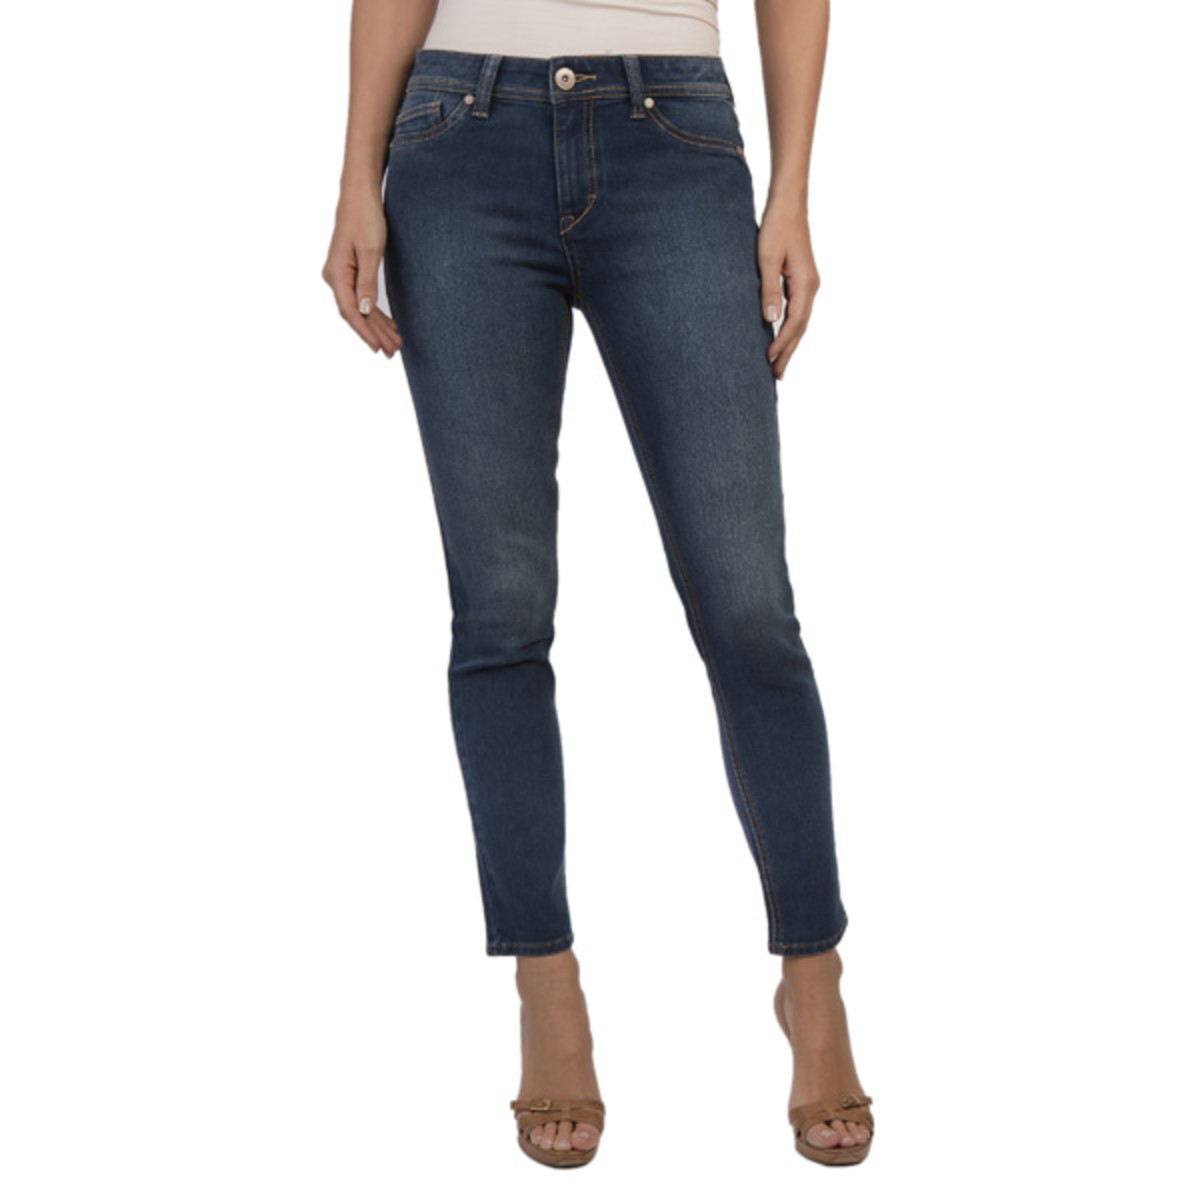 Jordache: Mommy and Me Jeans Giveaway - MomTrendsMomTrends